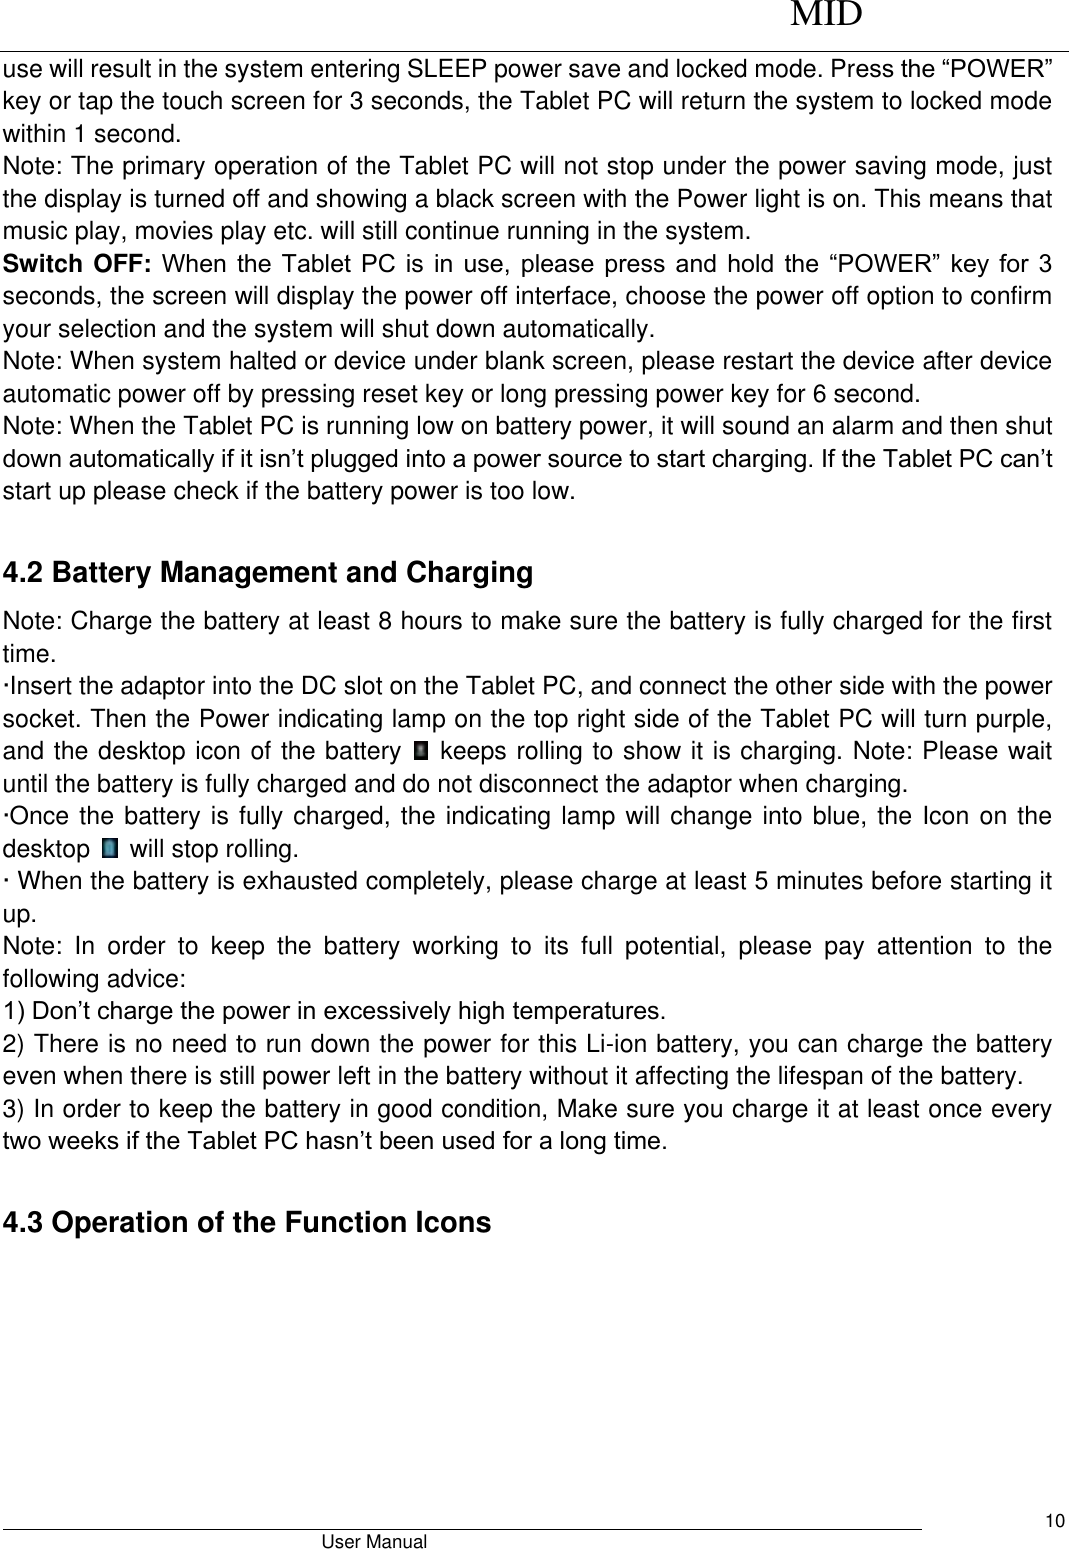      MID                                        User Manual     10 use will result in the system entering SLEEP power save and locked mode. Press the “POWER” key or tap the touch screen for 3 seconds, the Tablet PC will return the system to locked mode within 1 second.   Note: The primary operation of the Tablet PC will not stop under the power saving mode, just the display is turned off and showing a black screen with the Power light is on. This means that music play, movies play etc. will still continue running in the system.   Switch OFF: When the  Tablet PC is in use, please press and hold the “POWER” key for 3 seconds, the screen will display the power off interface, choose the power off option to confirm your selection and the system will shut down automatically.   Note: When system halted or device under blank screen, please restart the device after device automatic power off by pressing reset key or long pressing power key for 6 second. Note: When the Tablet PC is running low on battery power, it will sound an alarm and then shut down automatically if it isn’t plugged into a power source to start charging. If the Tablet PC can’t start up please check if the battery power is too low.  4.2 Battery Management and Charging Note: Charge the battery at least 8 hours to make sure the battery is fully charged for the first time.   ·Insert the adaptor into the DC slot on the Tablet PC, and connect the other side with the power socket. Then the Power indicating lamp on the top right side of the Tablet PC will turn purple, and the desktop icon of the battery    keeps rolling to show it is charging. Note: Please wait until the battery is fully charged and do not disconnect the adaptor when charging.   ·Once the battery is fully charged, the indicating lamp will change into blue, the Icon on the desktop    will stop rolling.   · When the battery is exhausted completely, please charge at least 5 minutes before starting it up.   Note:  In  order  to  keep  the  battery  working  to  its  full  potential,  please  pay  attention  to  the following advice:   1) Don’t charge the power in excessively high temperatures.   2) There is no need to run down the power for this Li-ion battery, you can charge the battery even when there is still power left in the battery without it affecting the lifespan of the battery.   3) In order to keep the battery in good condition, Make sure you charge it at least once every two weeks if the Tablet PC hasn’t been used for a long time.  4.3 Operation of the Function Icons 